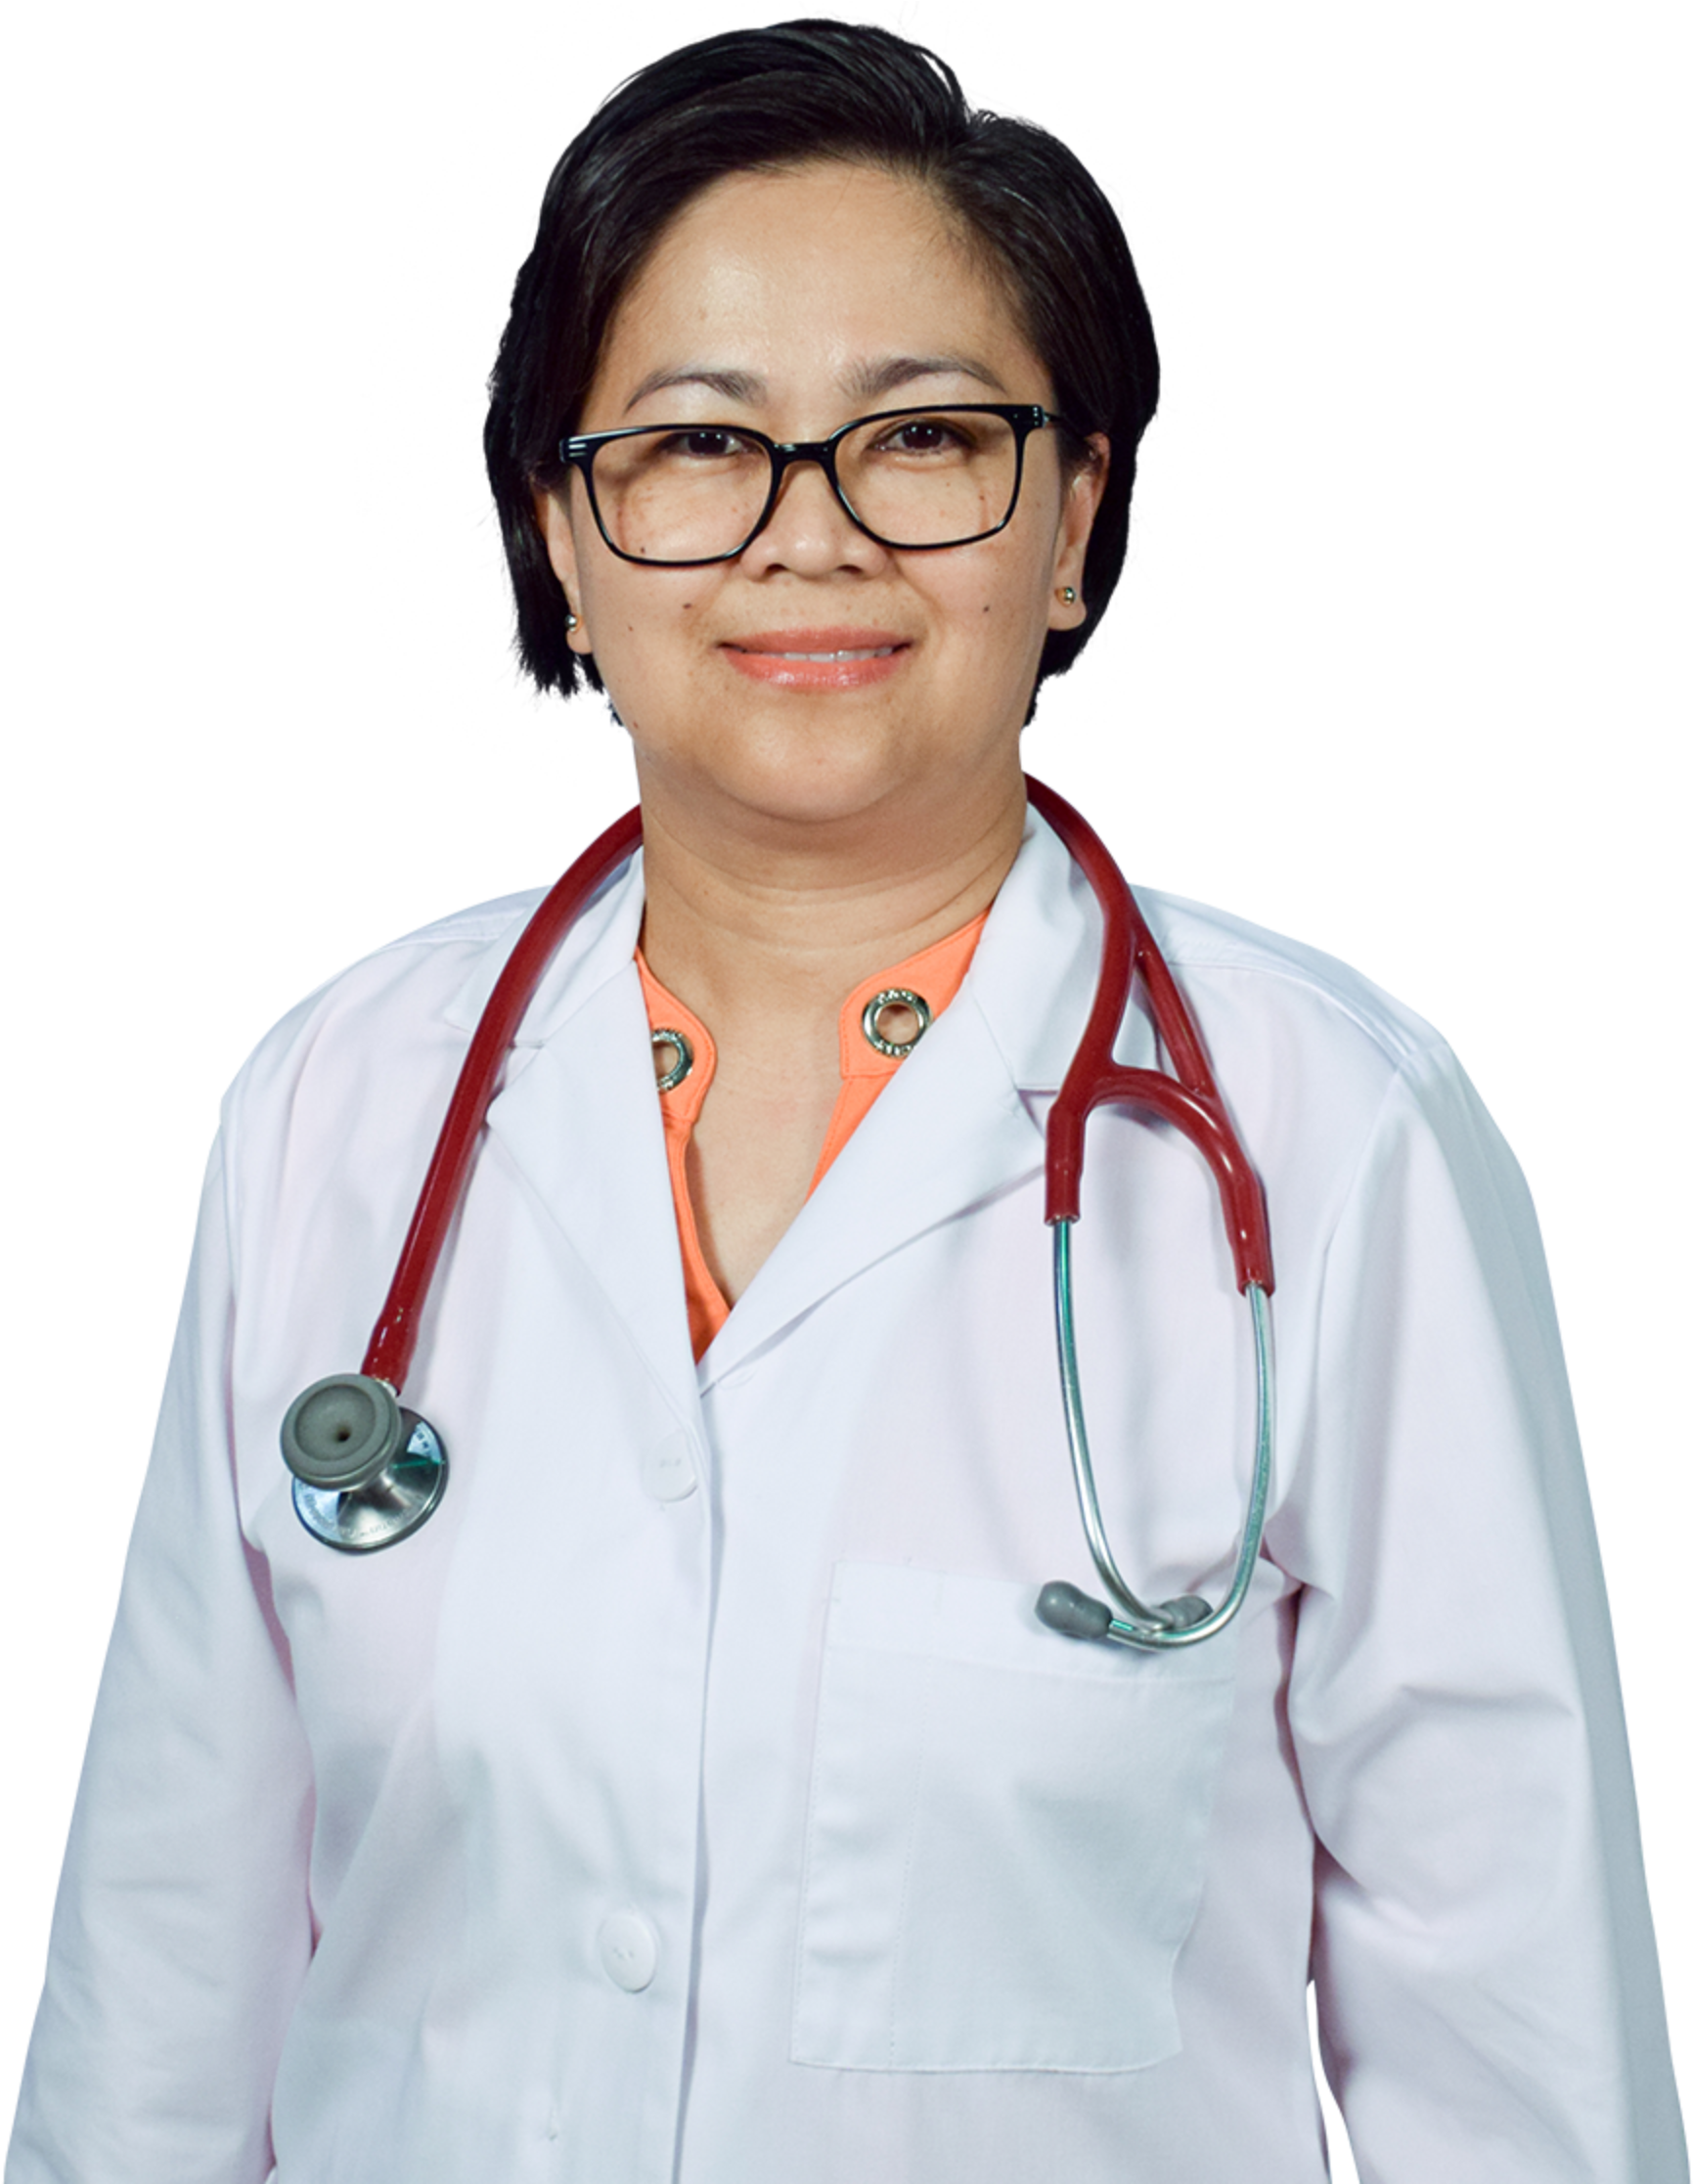 A Woman Wearing Glasses And A White Lab Coat With A Stethoscope Around Her Neck